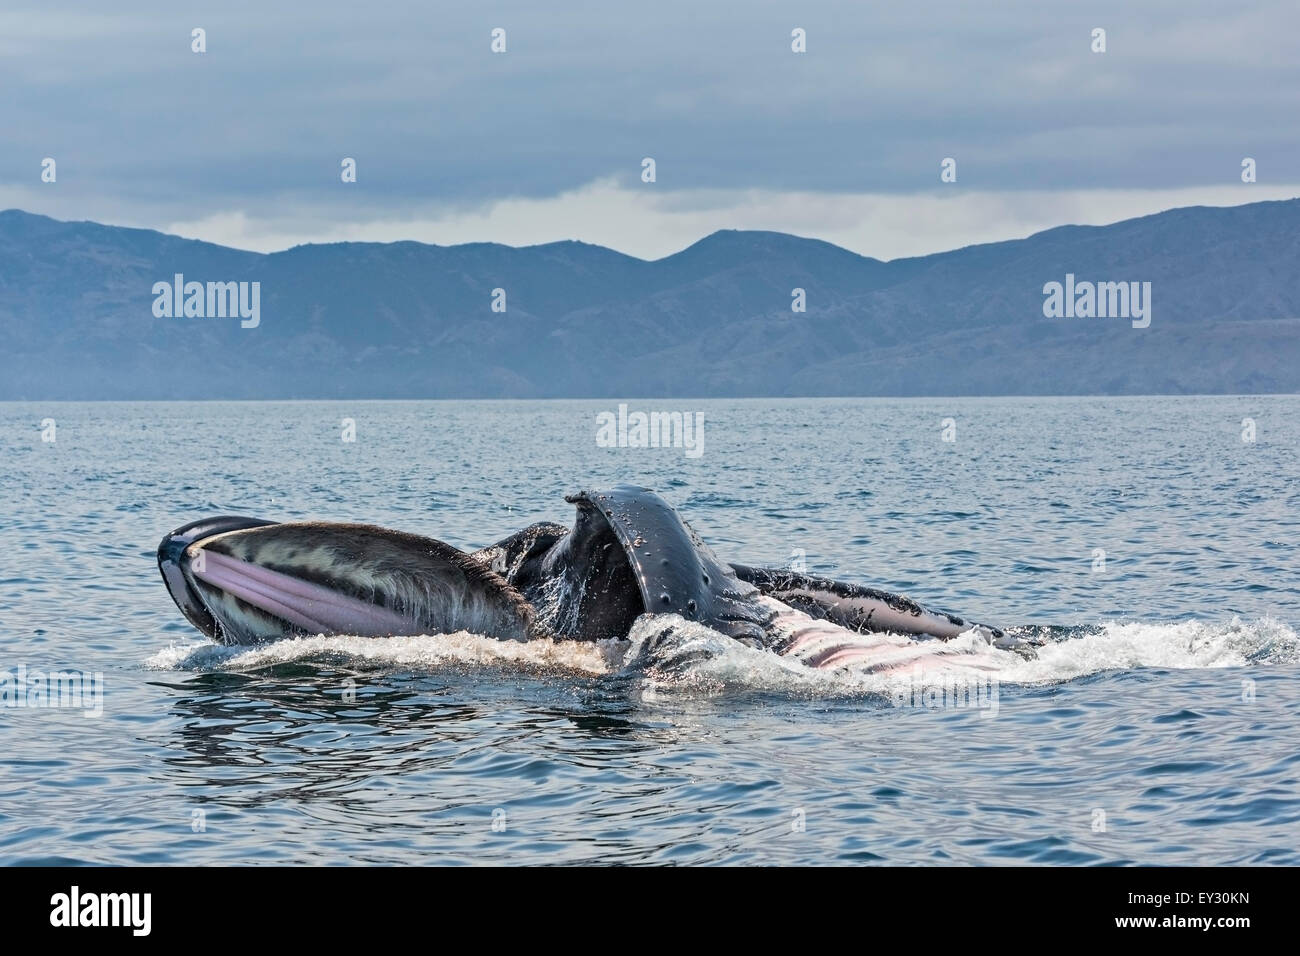 Close up view of a Humpback Whale lunge feeding in the Santa Barbara Channel near Channel Islands National Park, mouth wide open Stock Photo